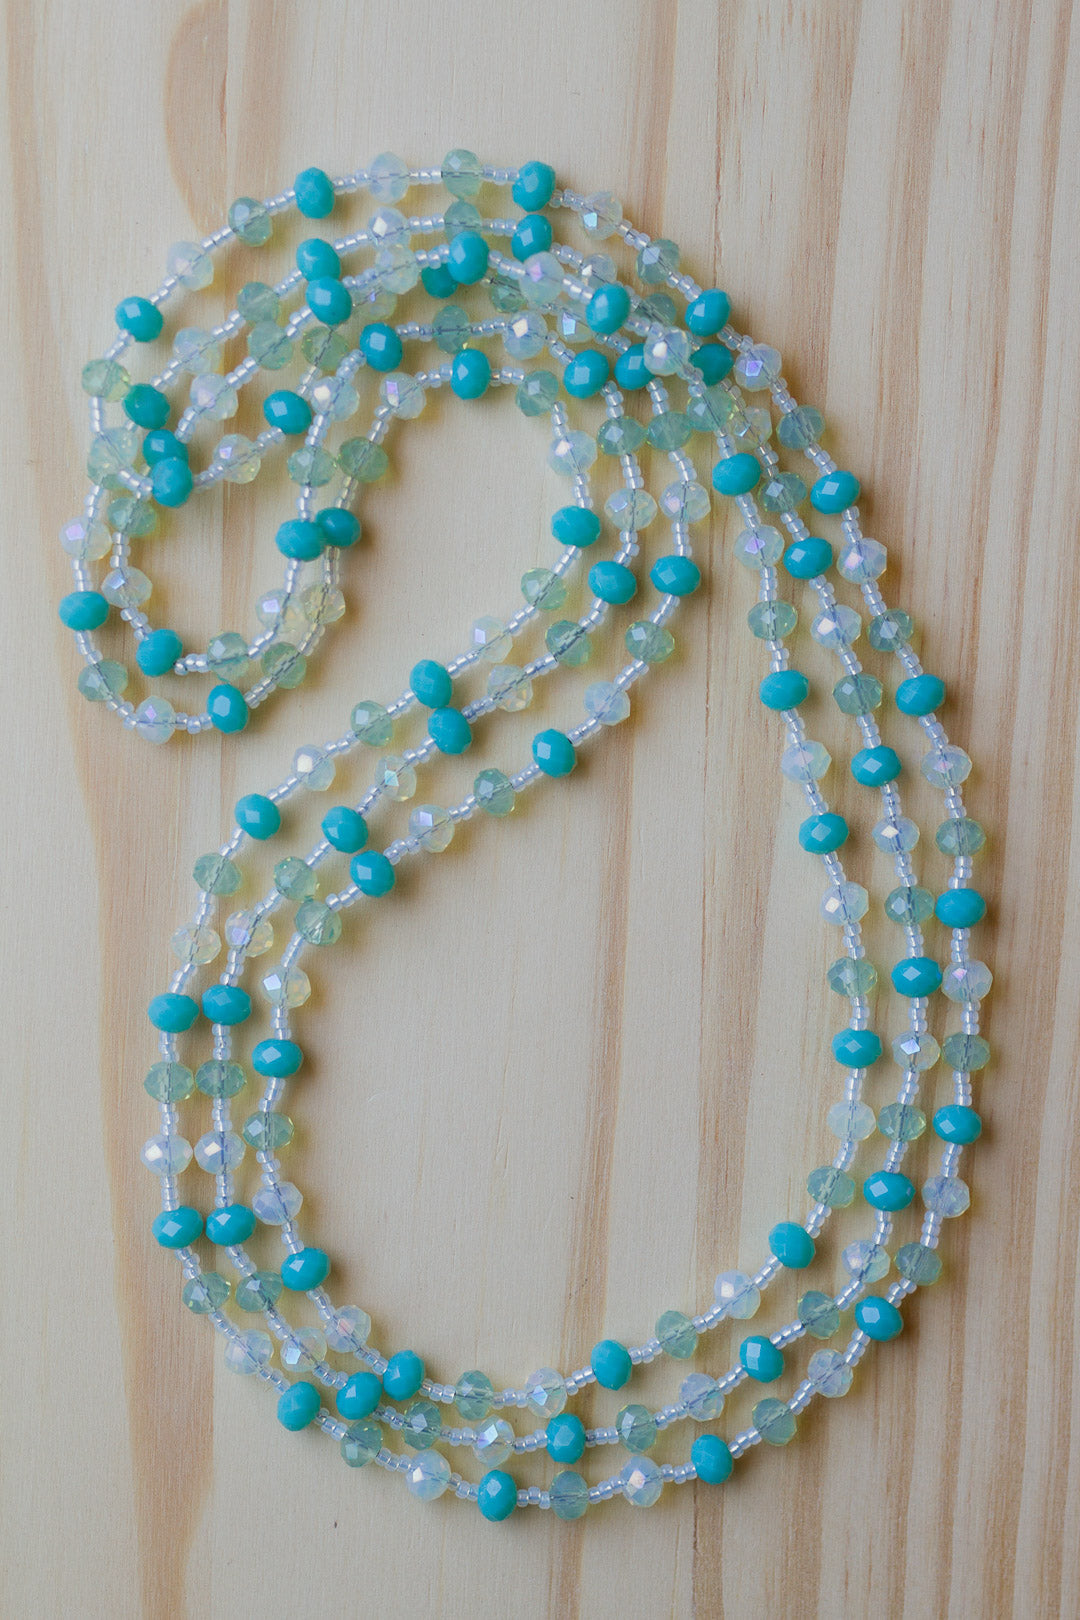 60" Extra Long Beaded Wraparound Necklace with Turquoise Peridot Green & Pale Lemon Crystal Beads - My Urban Gems